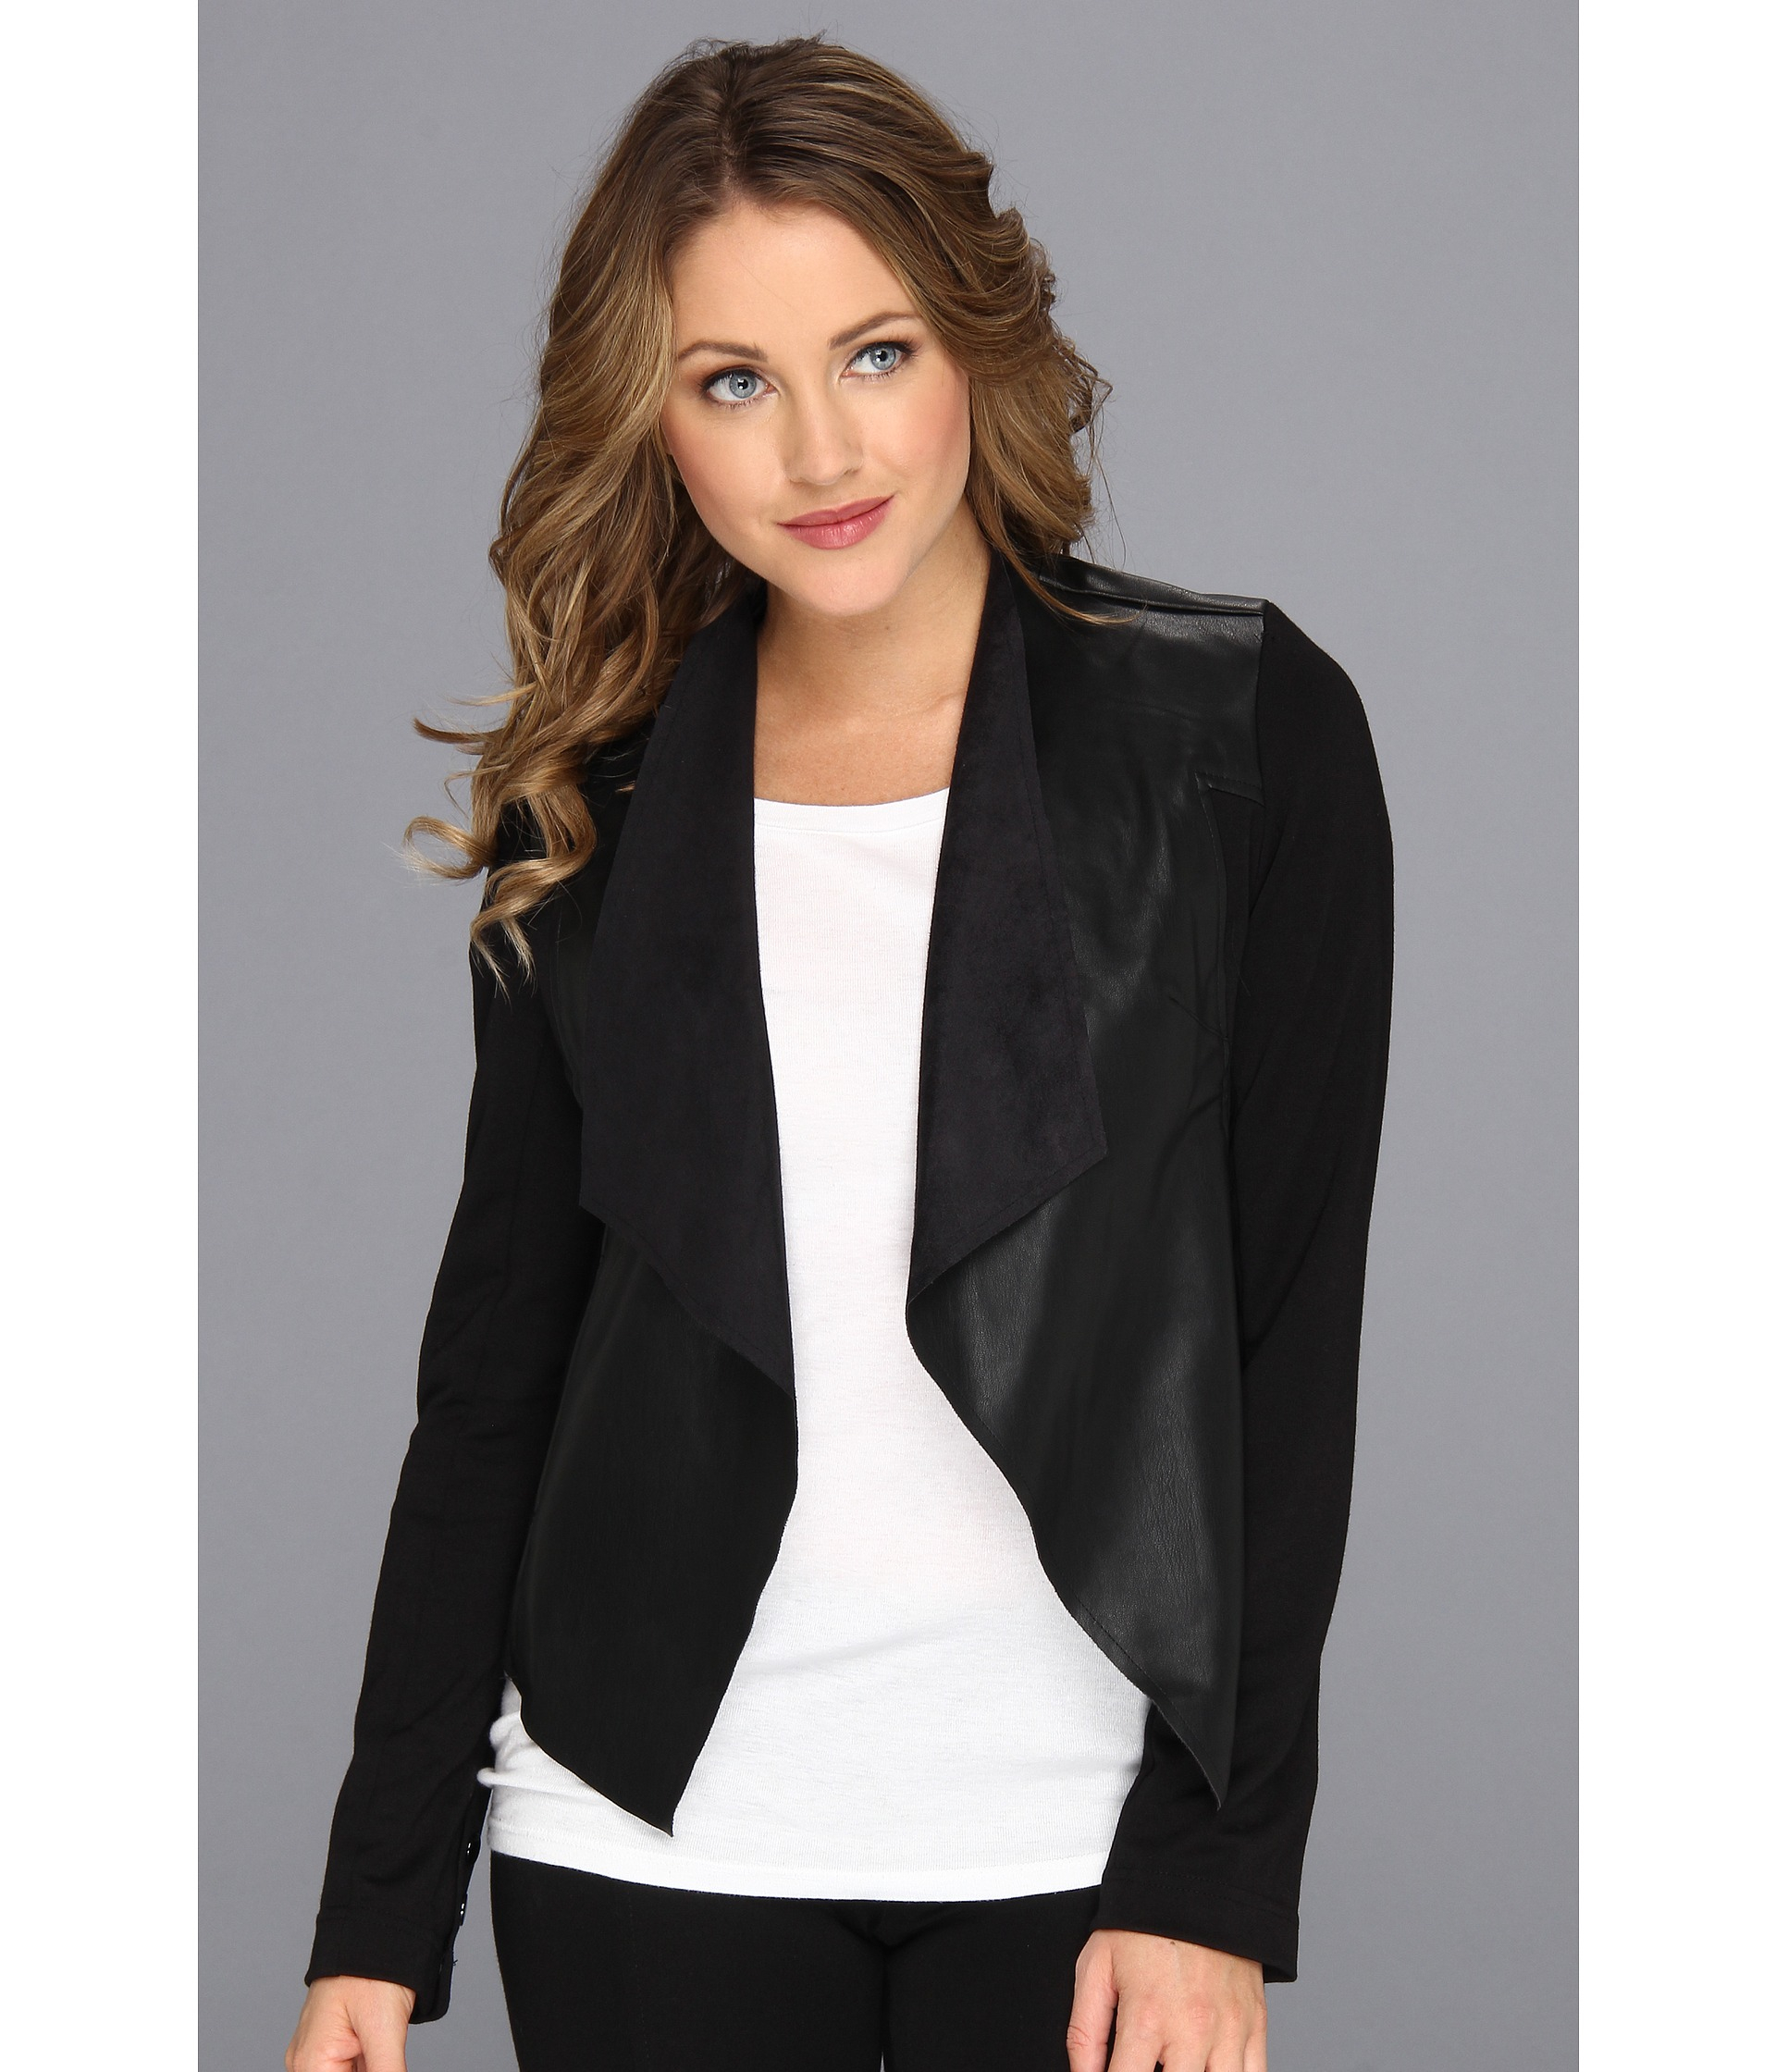 Lyst - Kut From The Kloth Faux Leather Drape Jacket in Black